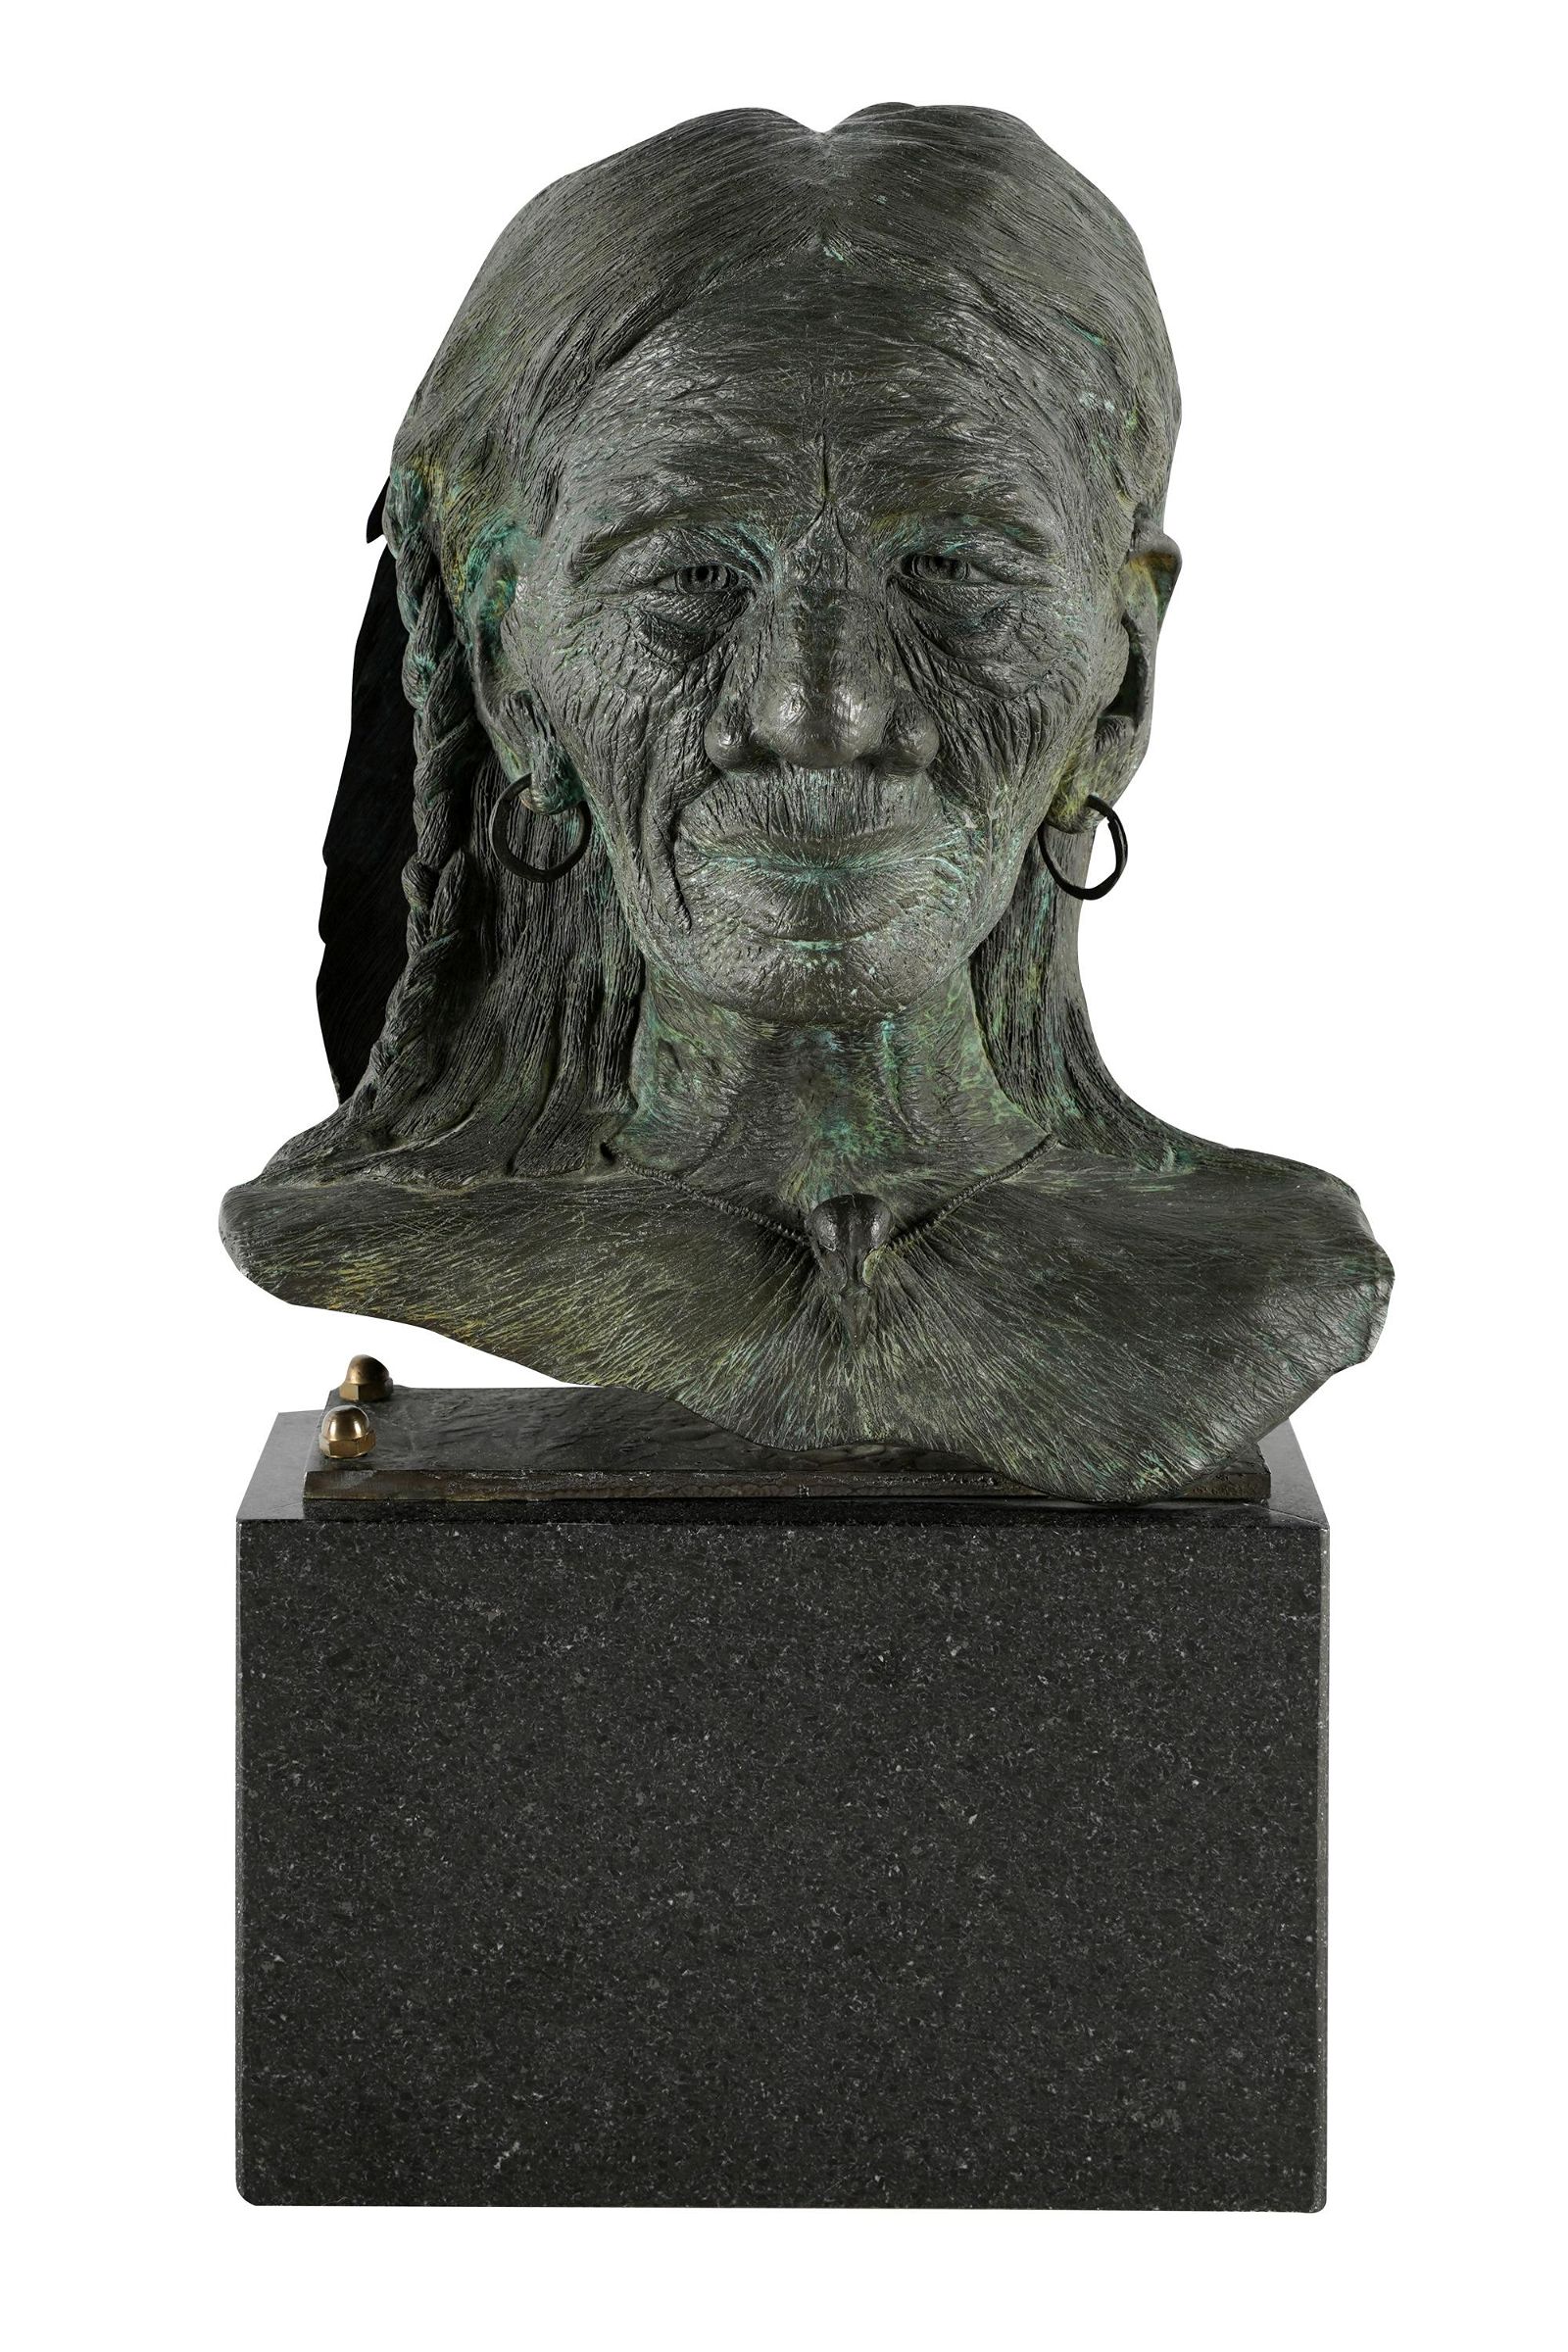 20TH CENTURY BUST OF A NATIVE 3974c8